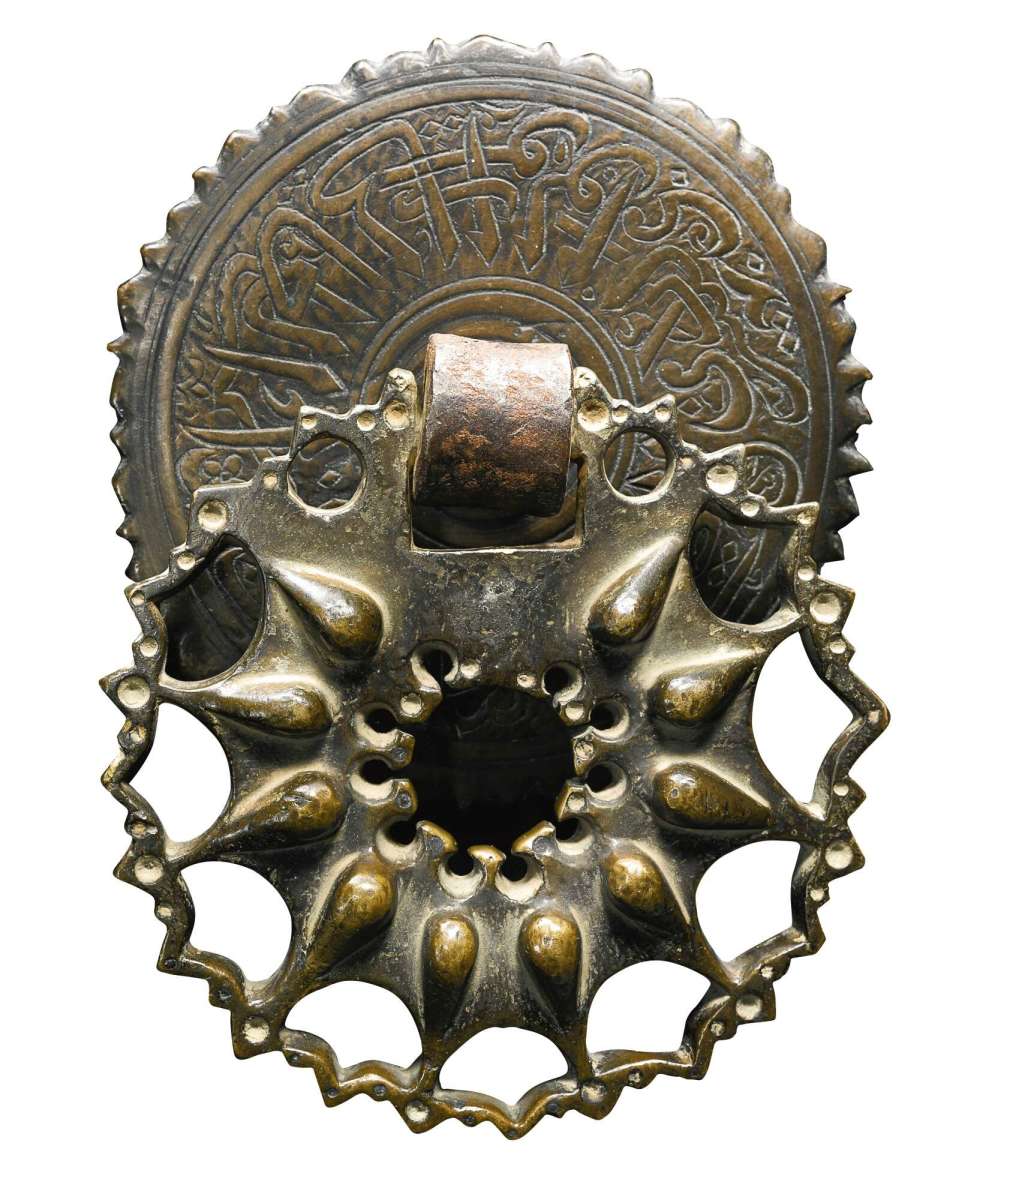 A Mamluk bronze door knocker, probably Egypt, 14th century. It is made of two separate sections, has a straight hook for hanging, and the plate has an engraved calligraphic band; $8,745.